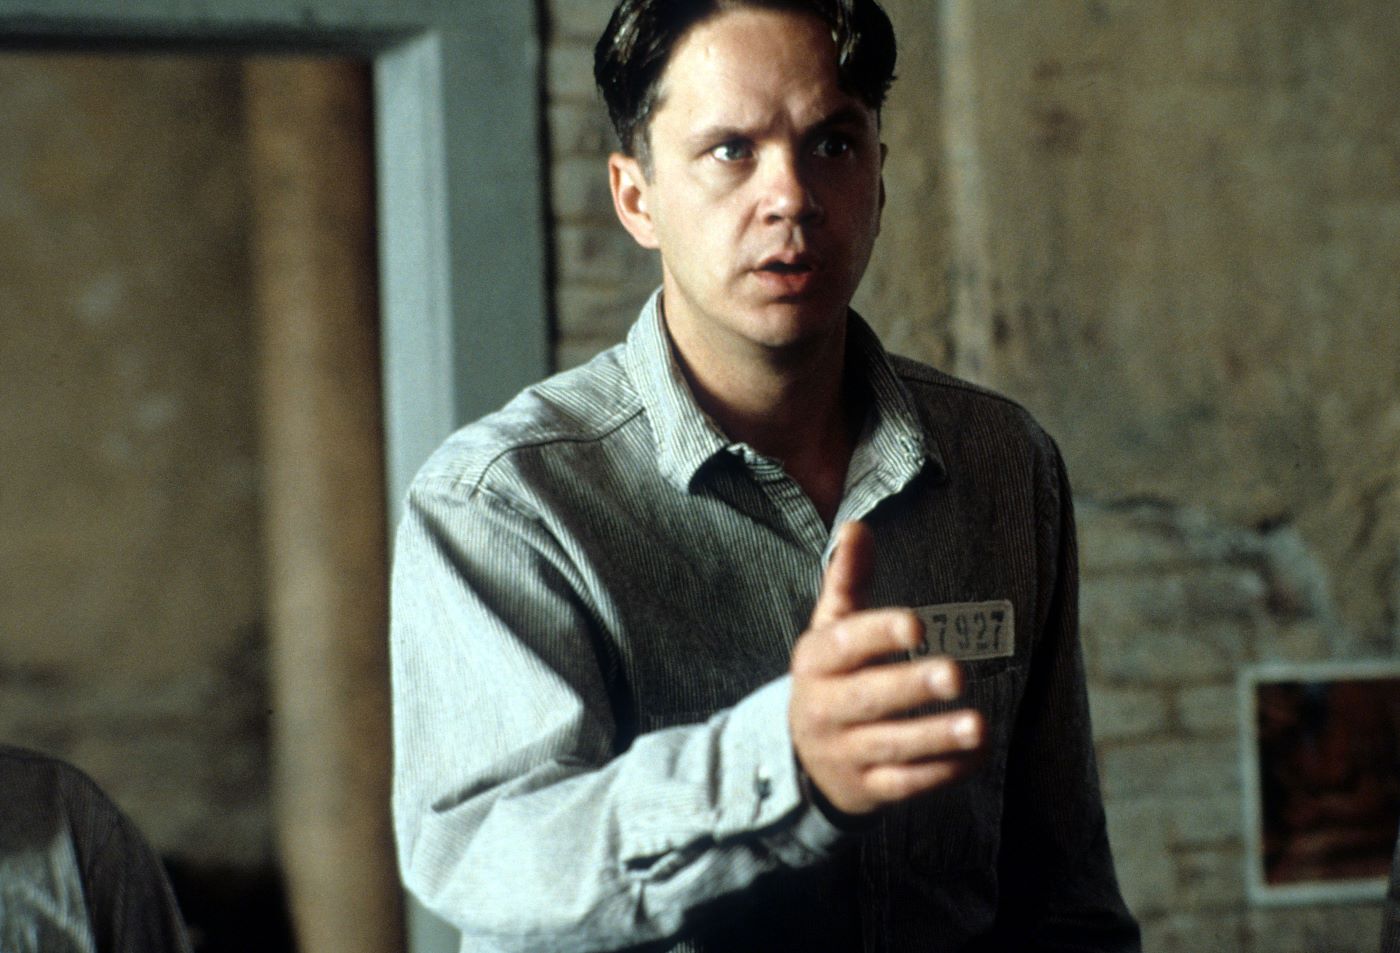 Tim Robbins in 'The Shawshank Redemption' dressed in his prison uniform in a stone room with his hand offered for a handshake.